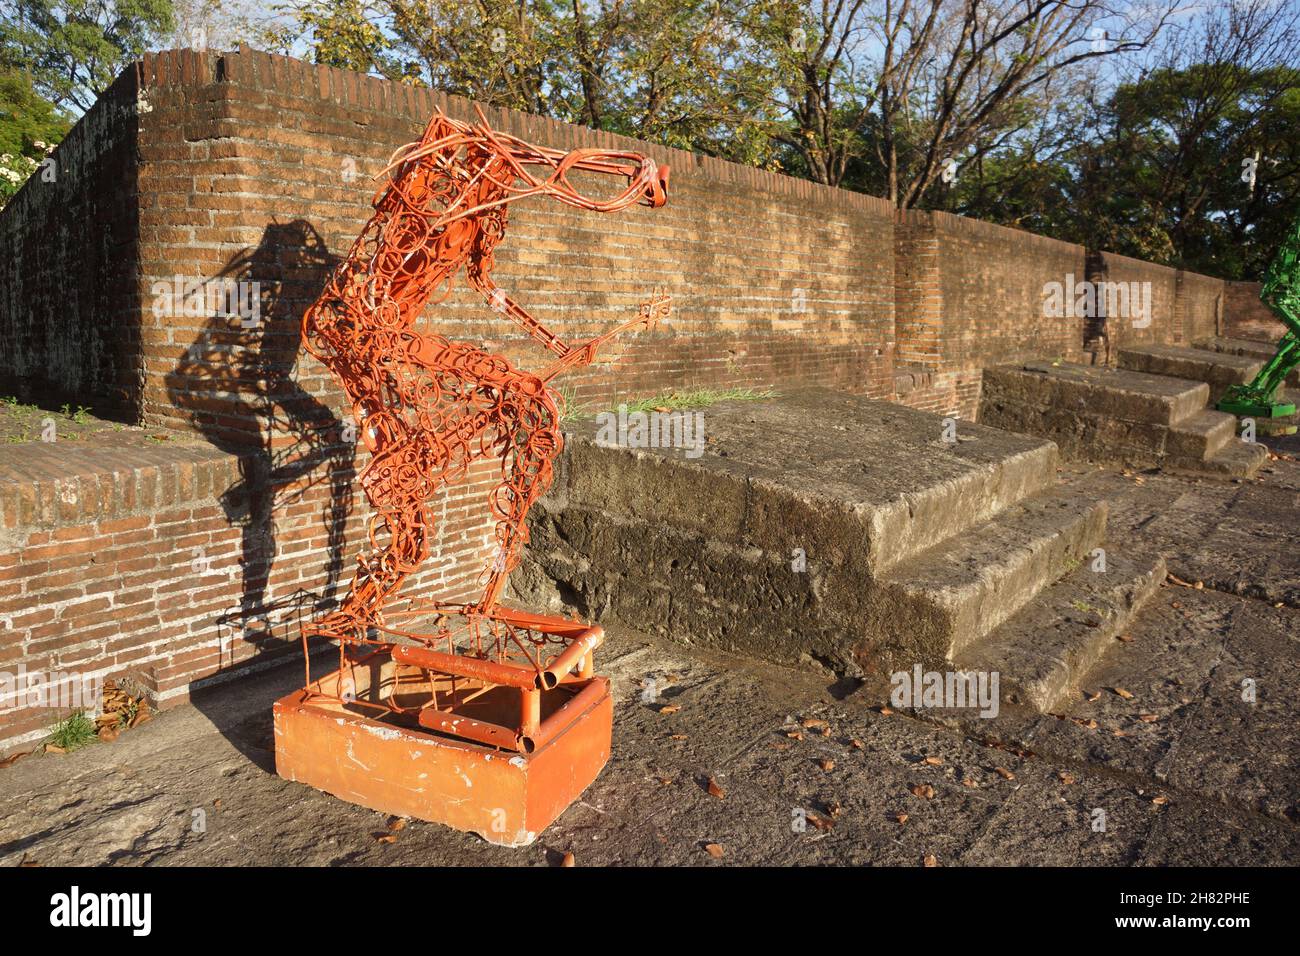 MANI, PHILIPPINES - Mar 16, 2019: A Public art installation in the walled city of Intramuros, Manila, Philippines Stock Photo